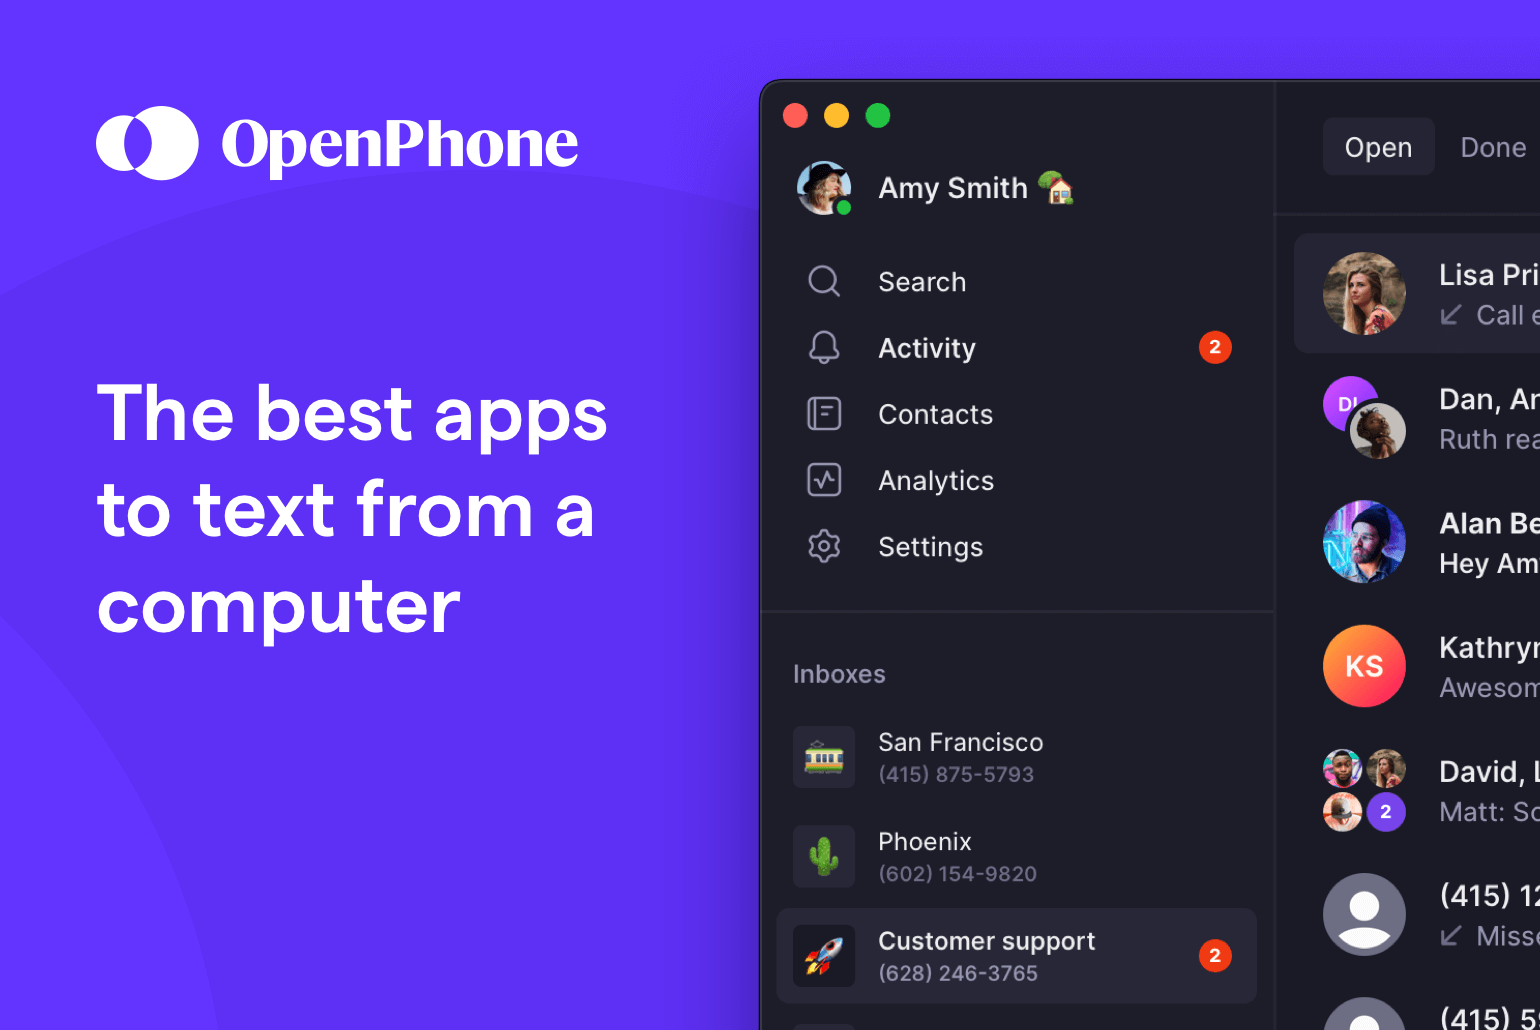 Best apps to text from computer